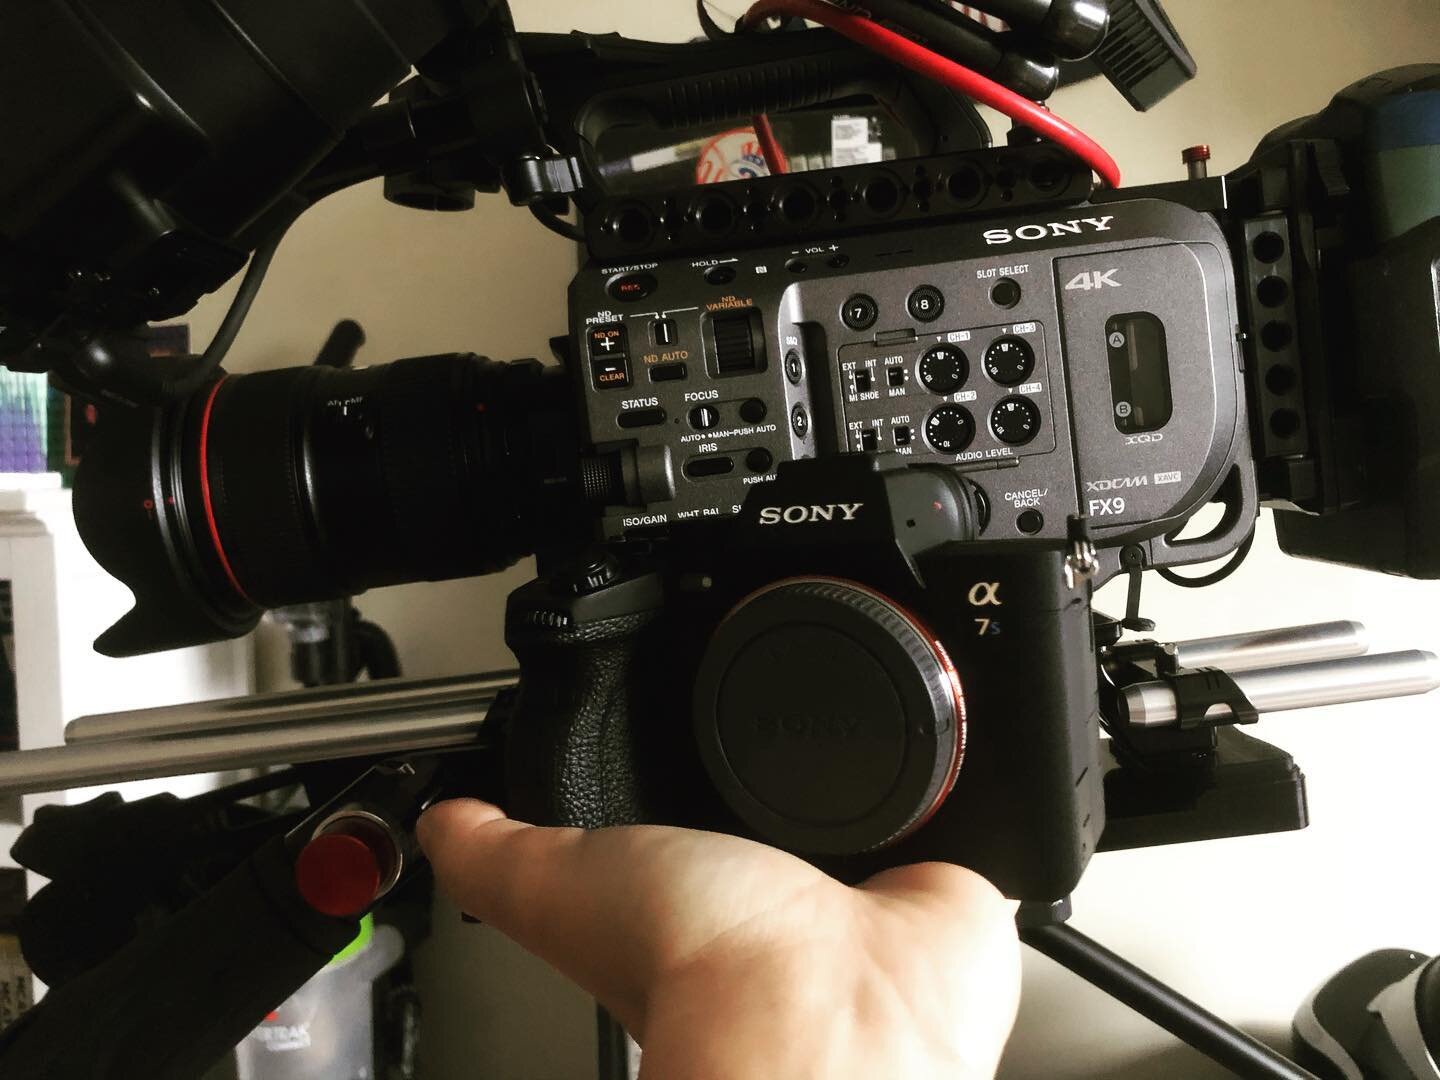 We have a couple new members of our equipment family. Both available for rental!! #sony #sonyalpha #sonya7siii #sonyfx9 #sonycine #canon2470mm #antonbauer #shape #smallhd